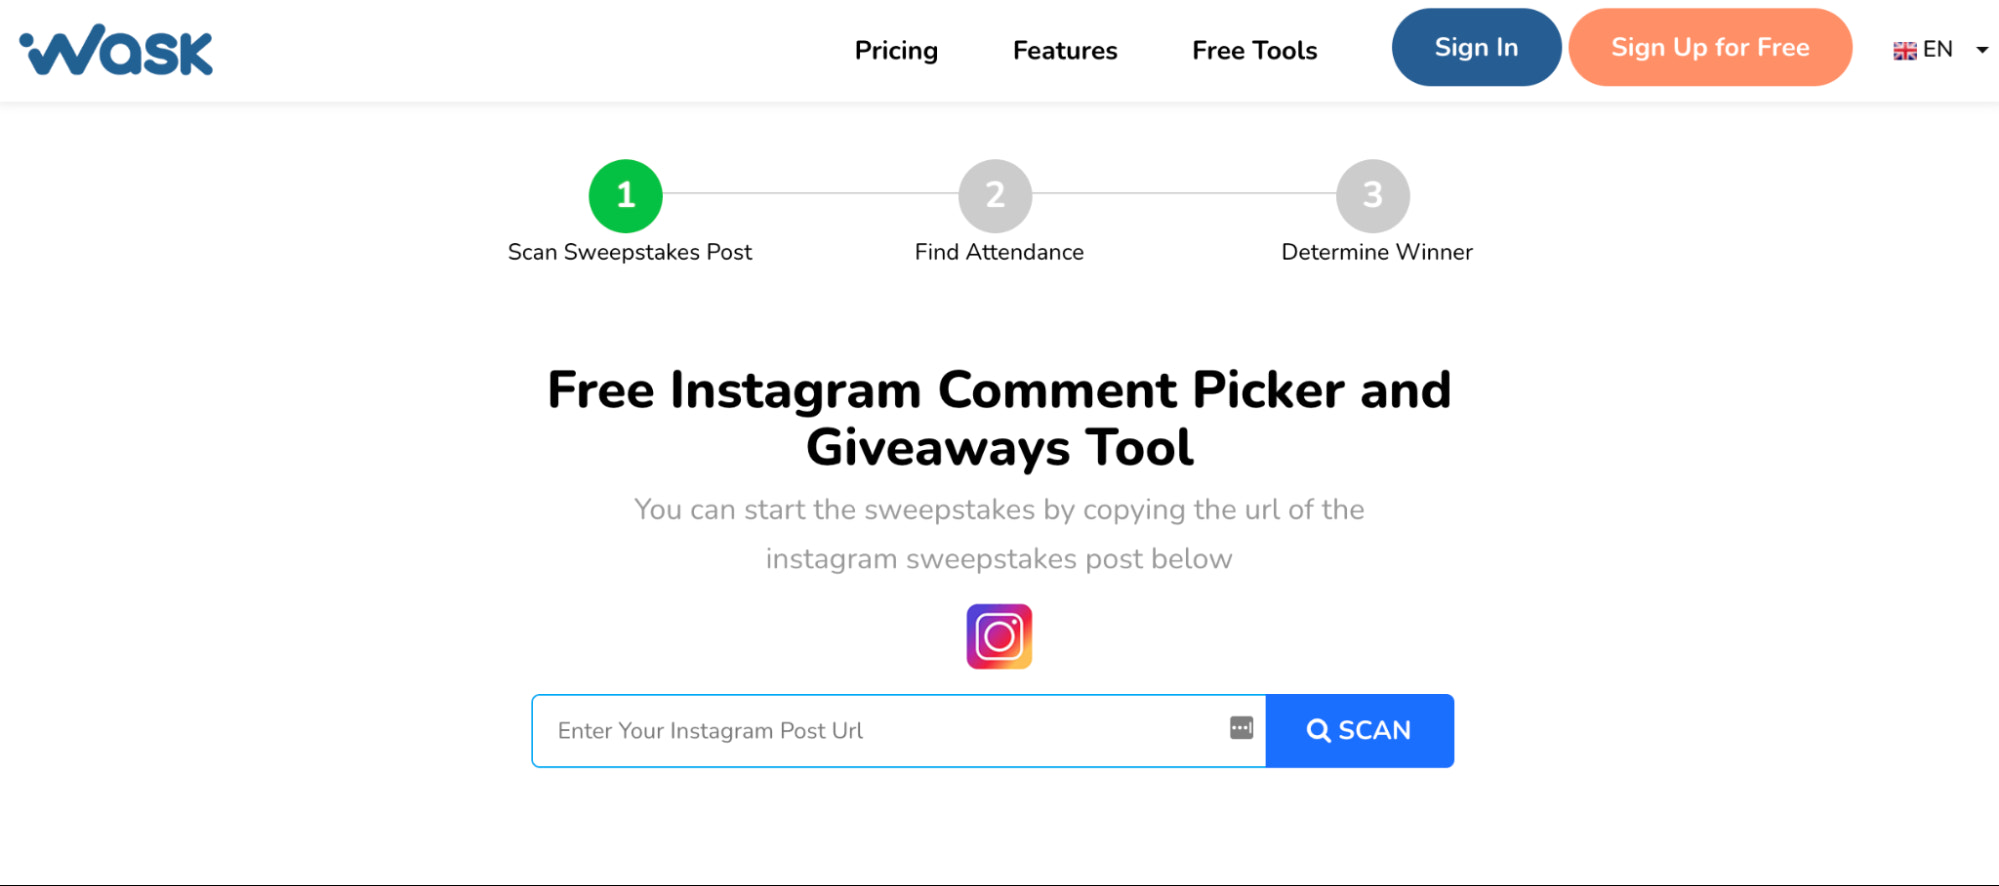 How to Do a Giveaway on Instagram (+ Rules, Ideas and Tips)